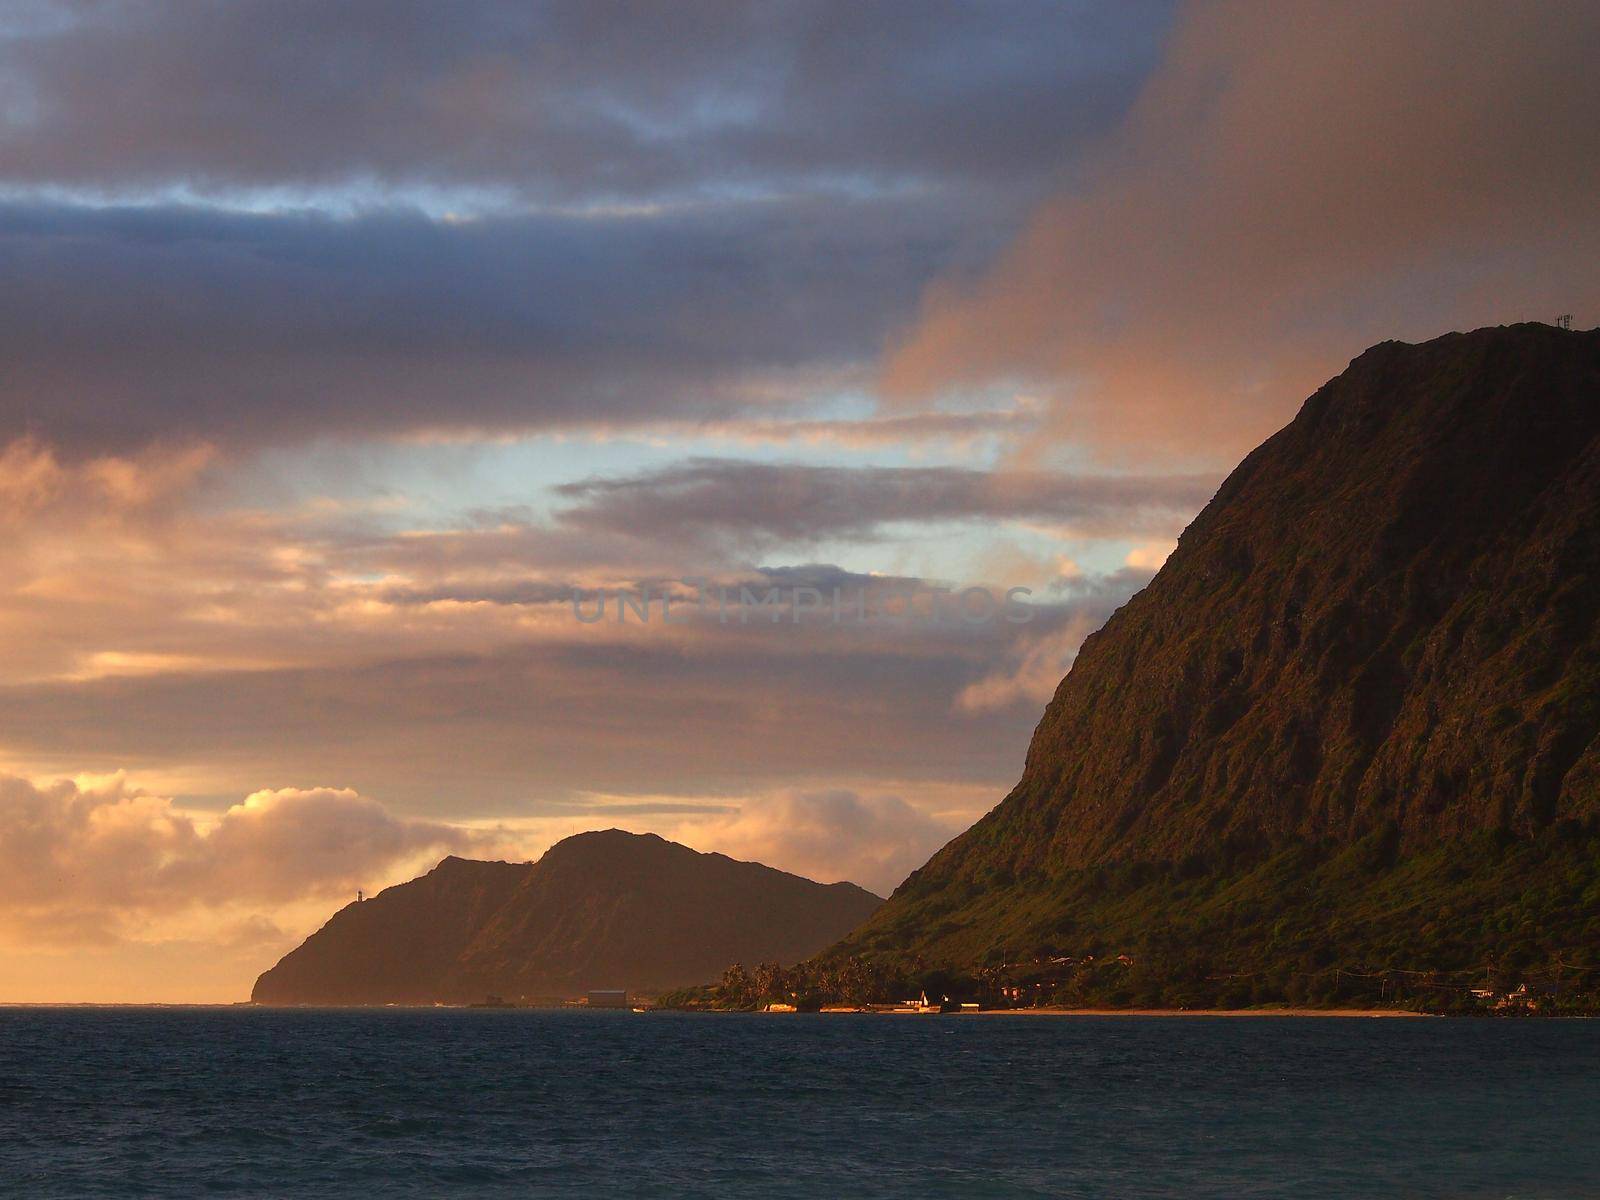 Waimanalo beach, bay, and Makapuu Point with Makapu'u Lighthouse visible on cliffside mountain on windward coast at dawn by EricGBVD